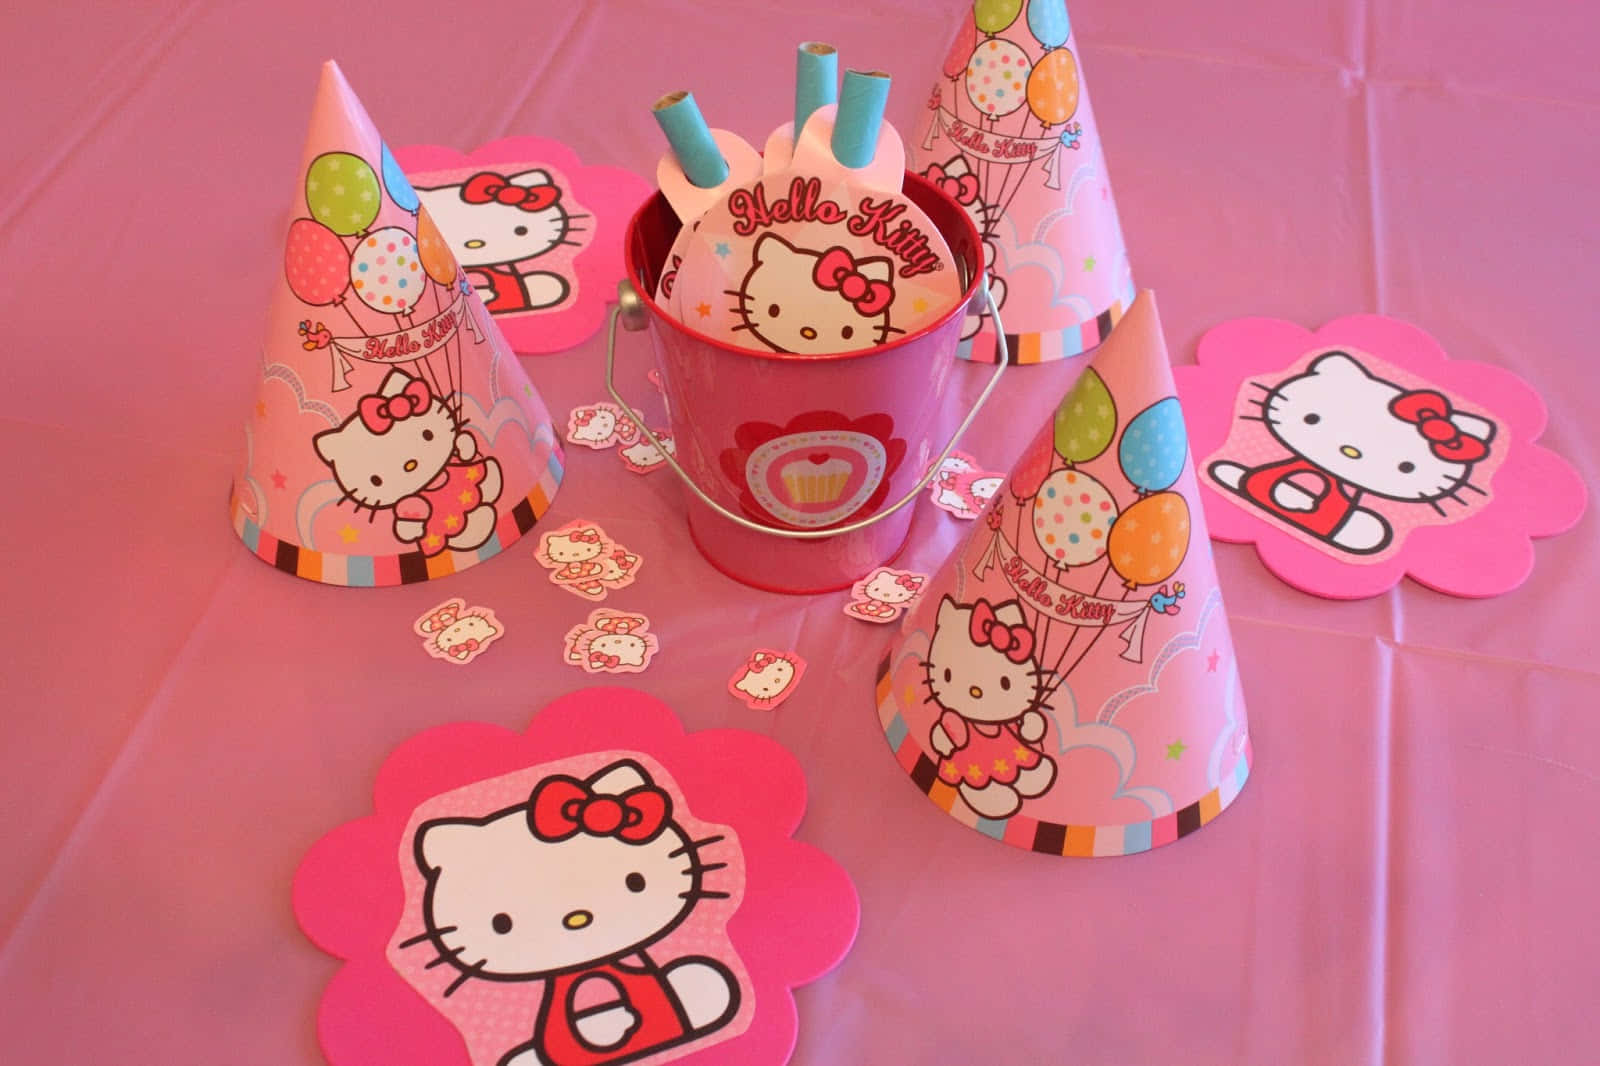 Hello Kitty Party with Pink Confetti and Decorations Wallpaper